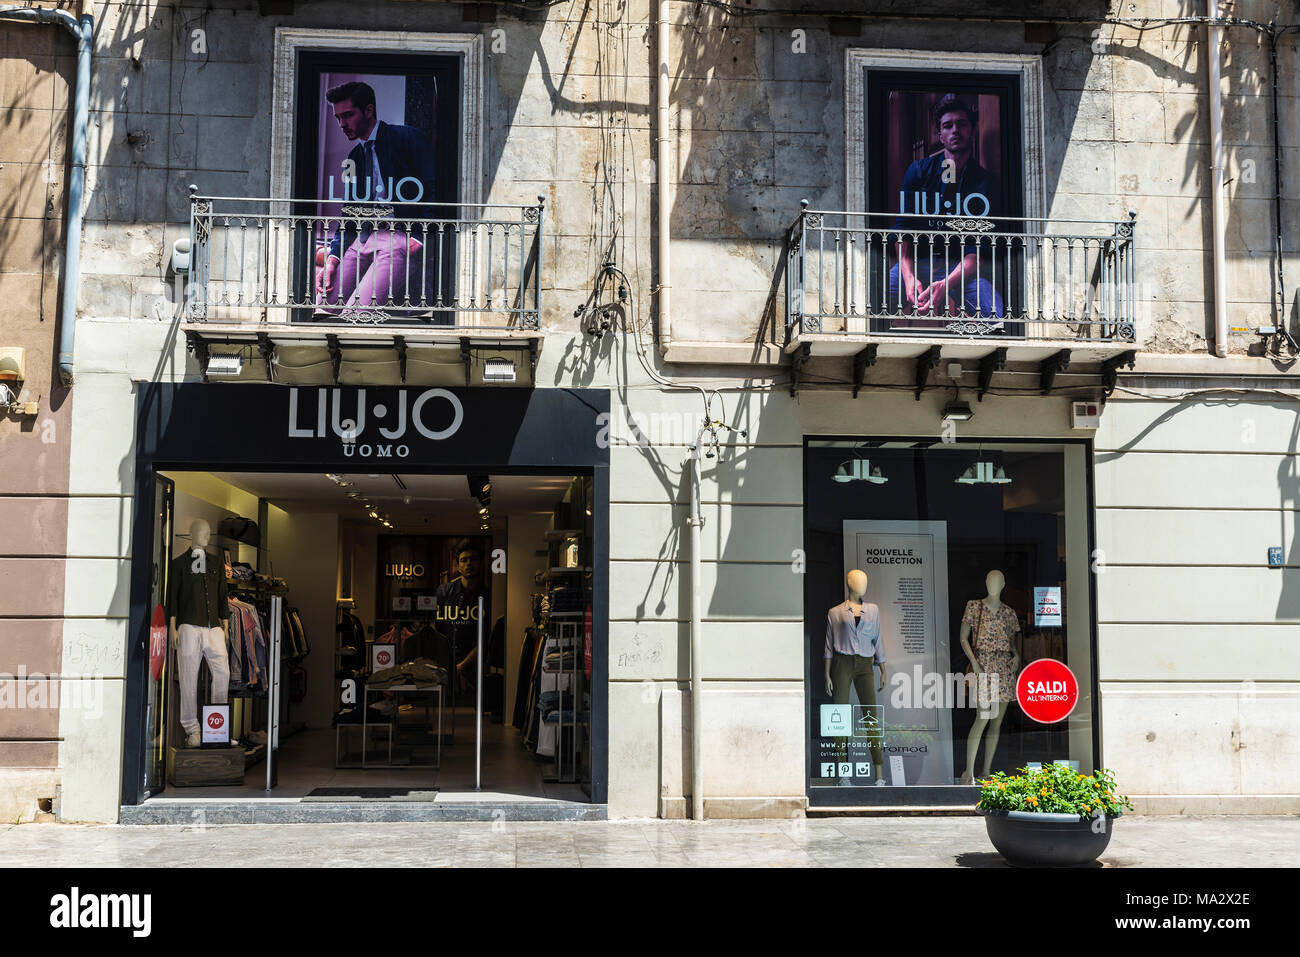 Palermo, Italy - August 10, 2017: Liu Jo shop in the center of Palermo in Sicily, Italy Stock Photo